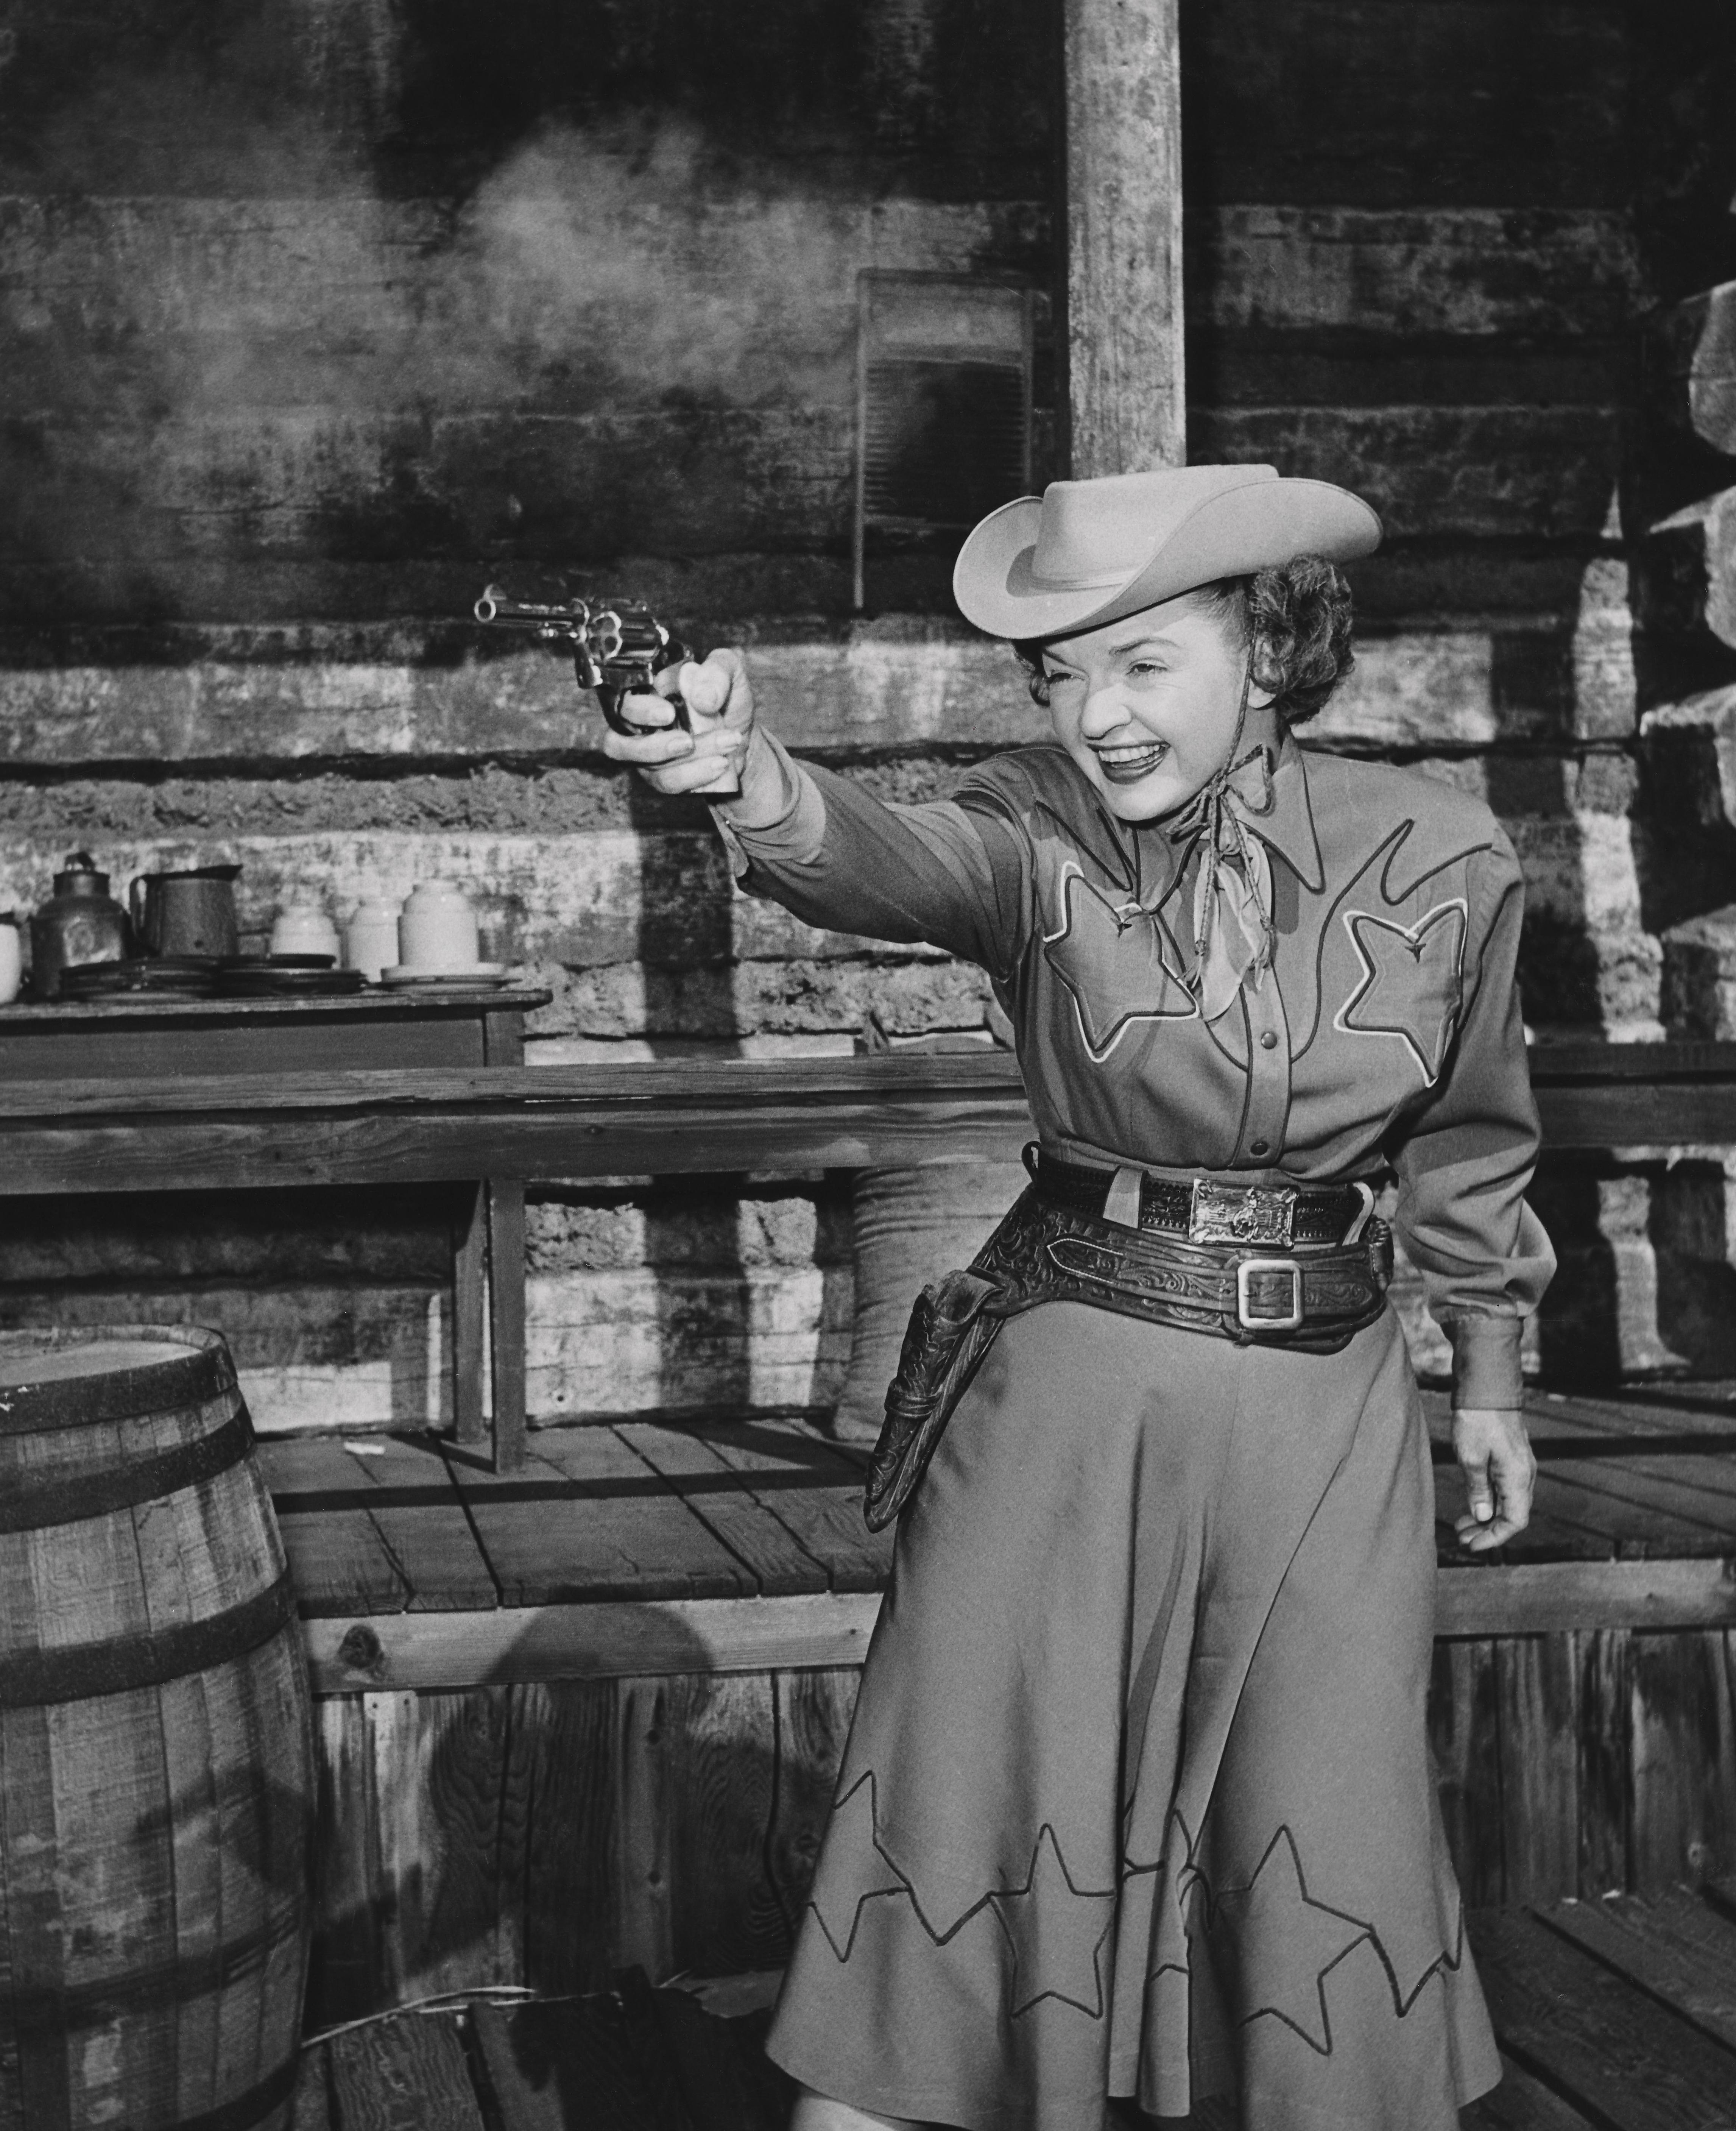 Unknown Black and White Photograph - Dale Evans: Queen of the West Firing Pistol Globe Photos Fine Art Print